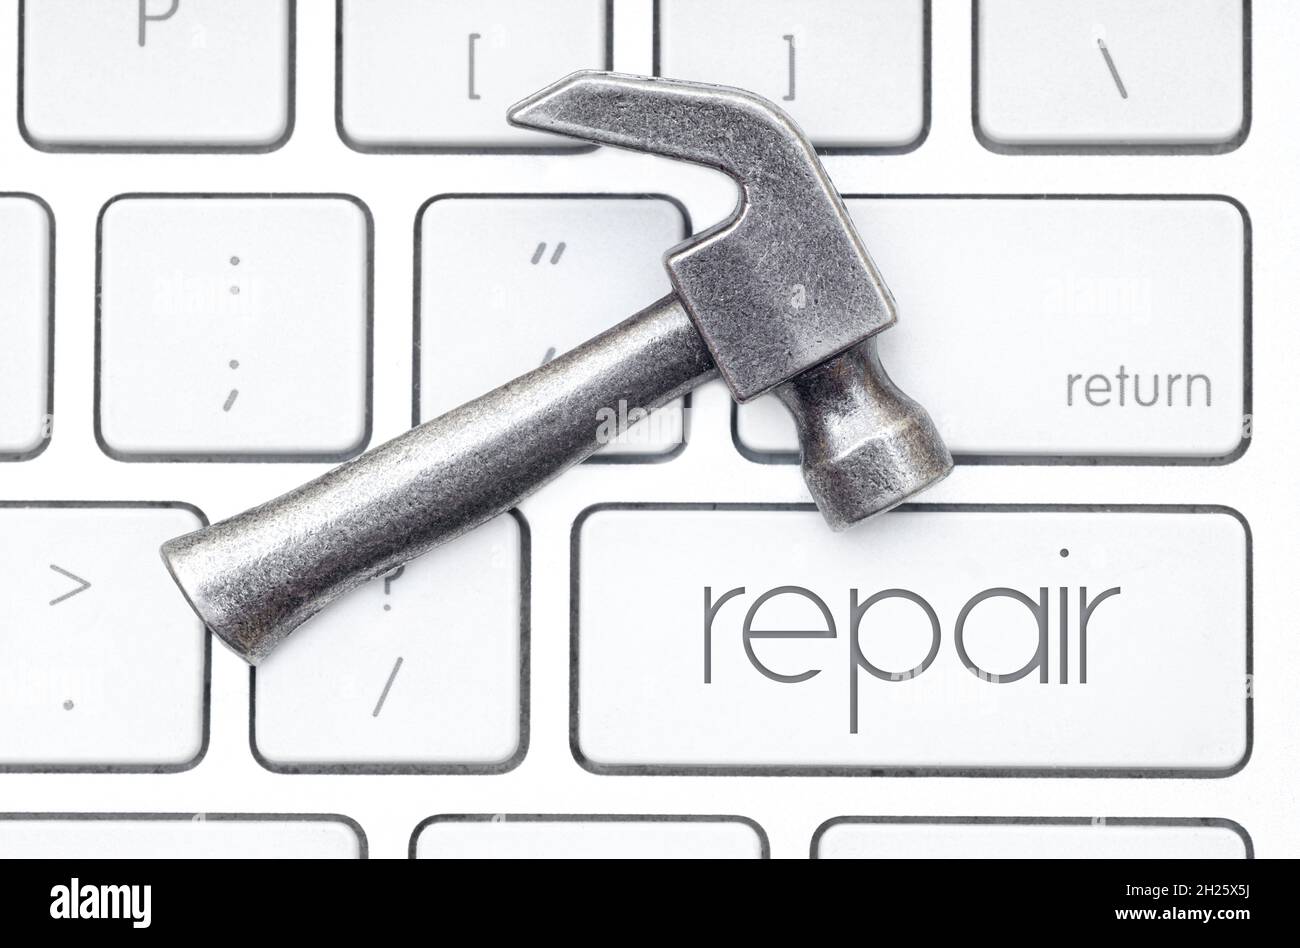 Small steel hammer lies on the keyboard, which has a key labeled as REPAIR. Hardware service concept. Stock Photo